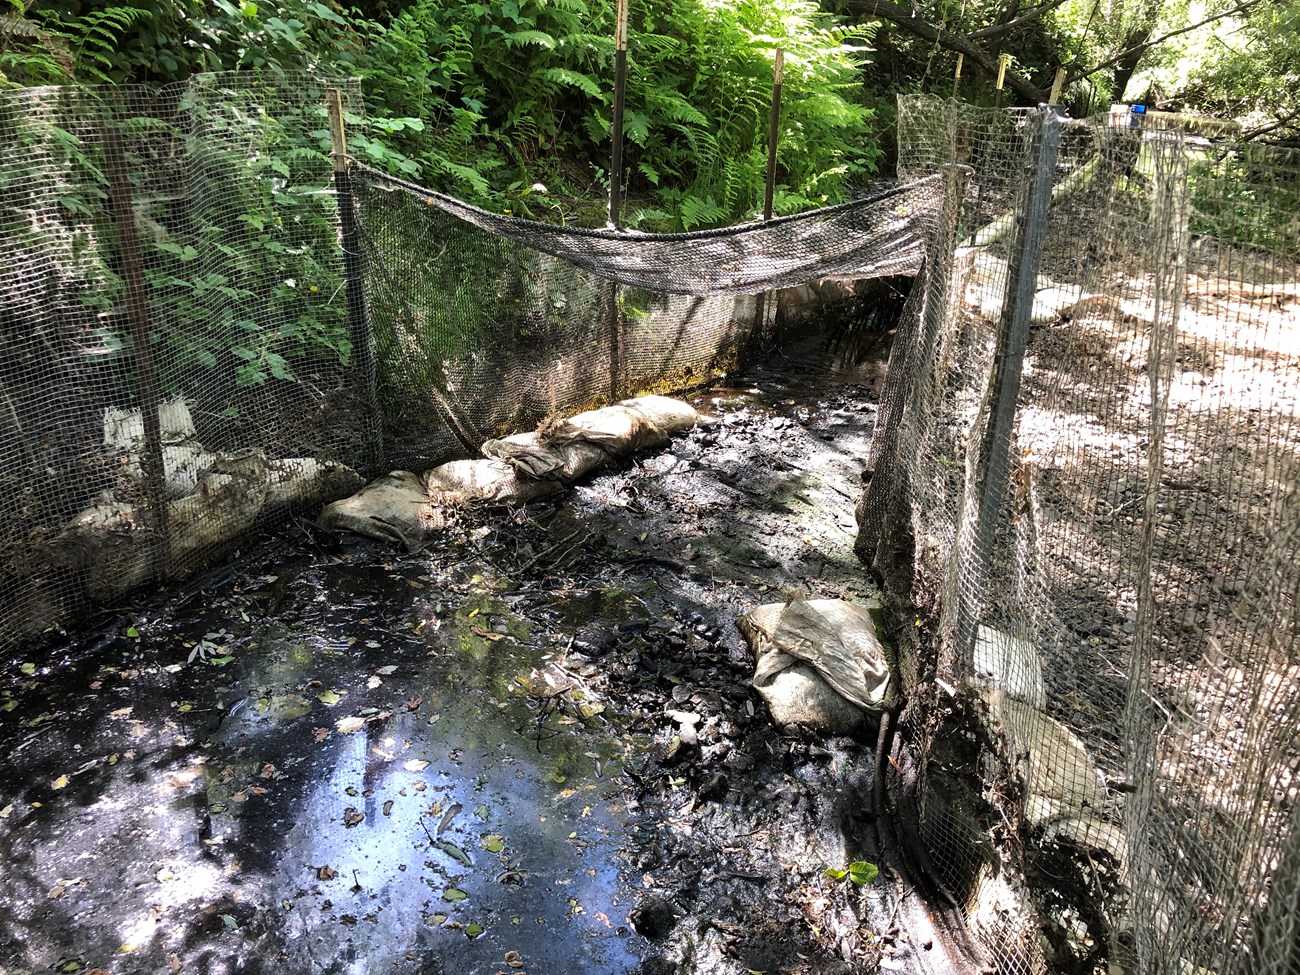 Disconnected puddles of water along the creek bed where a smolt trap is set up.